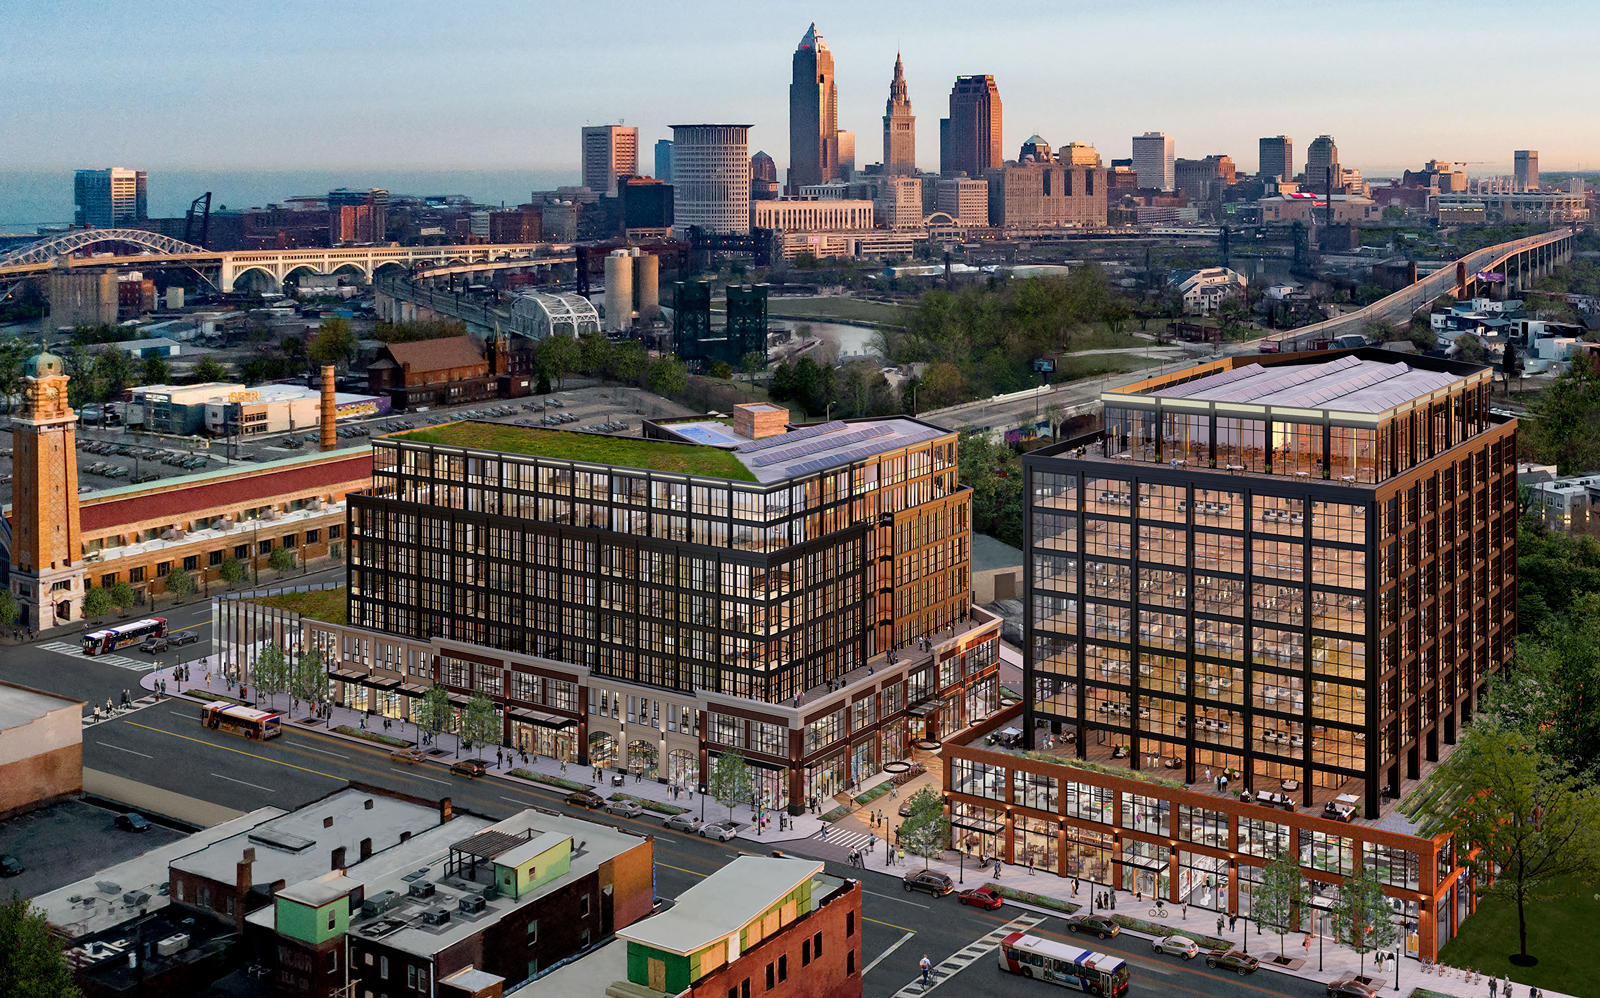 A mass timber project in Cleveland is now under construction and could be the nation’s tallest when completed. Harbor Bay Real Estate Advisors’ Intro development will rise nine stories with 298 residential units (Credit: Harbor Bay Real Estate Advisors)